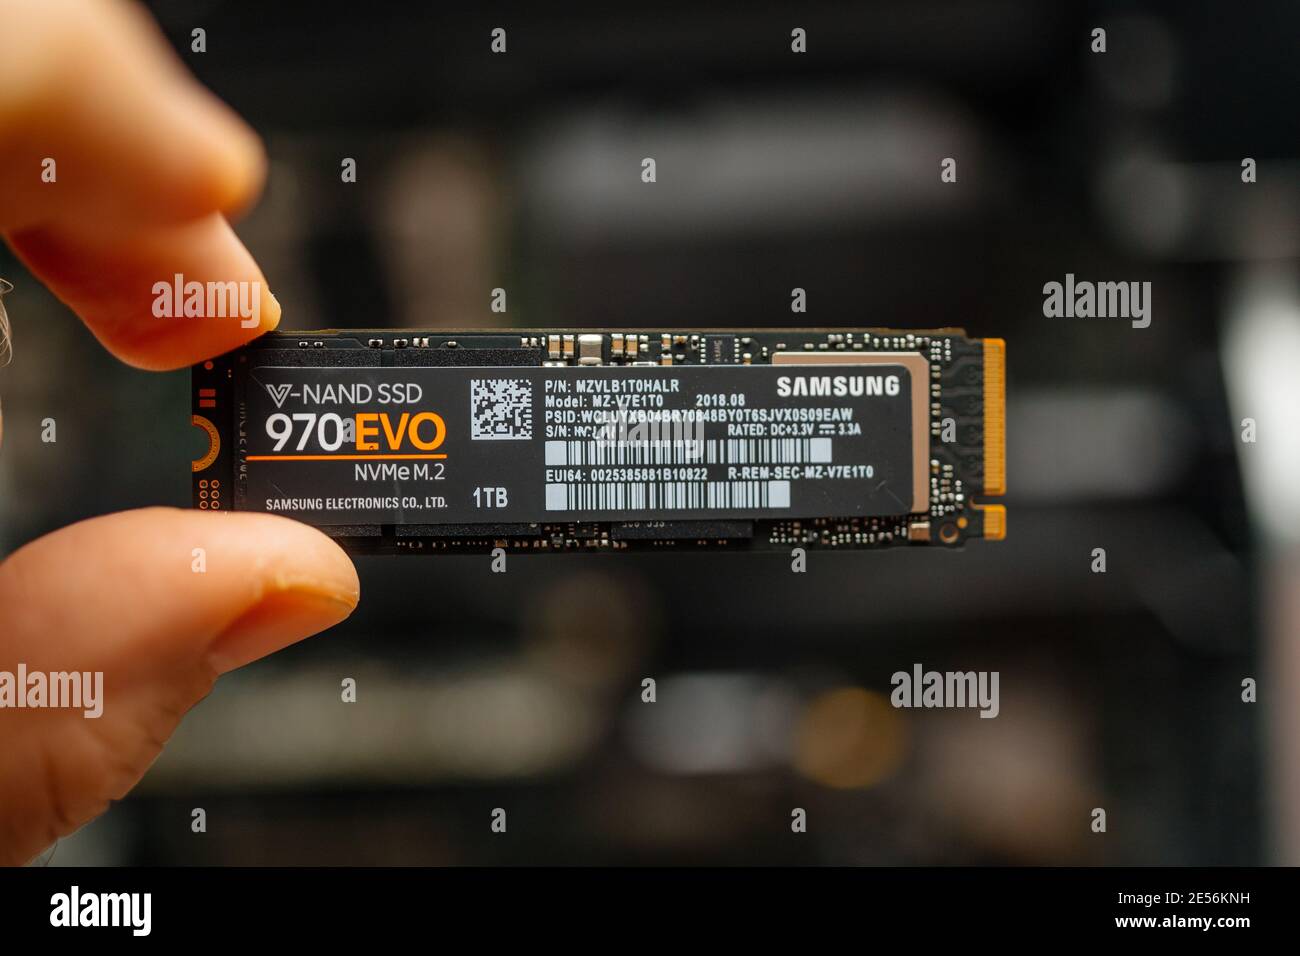 London, United Kingdom - Jan 18, 2019: POV personal perspective male hand  holds new M2 connector the new Samsung NVME V-Nand SSD Samsung 970 disk  with one terabyte storage space compter background